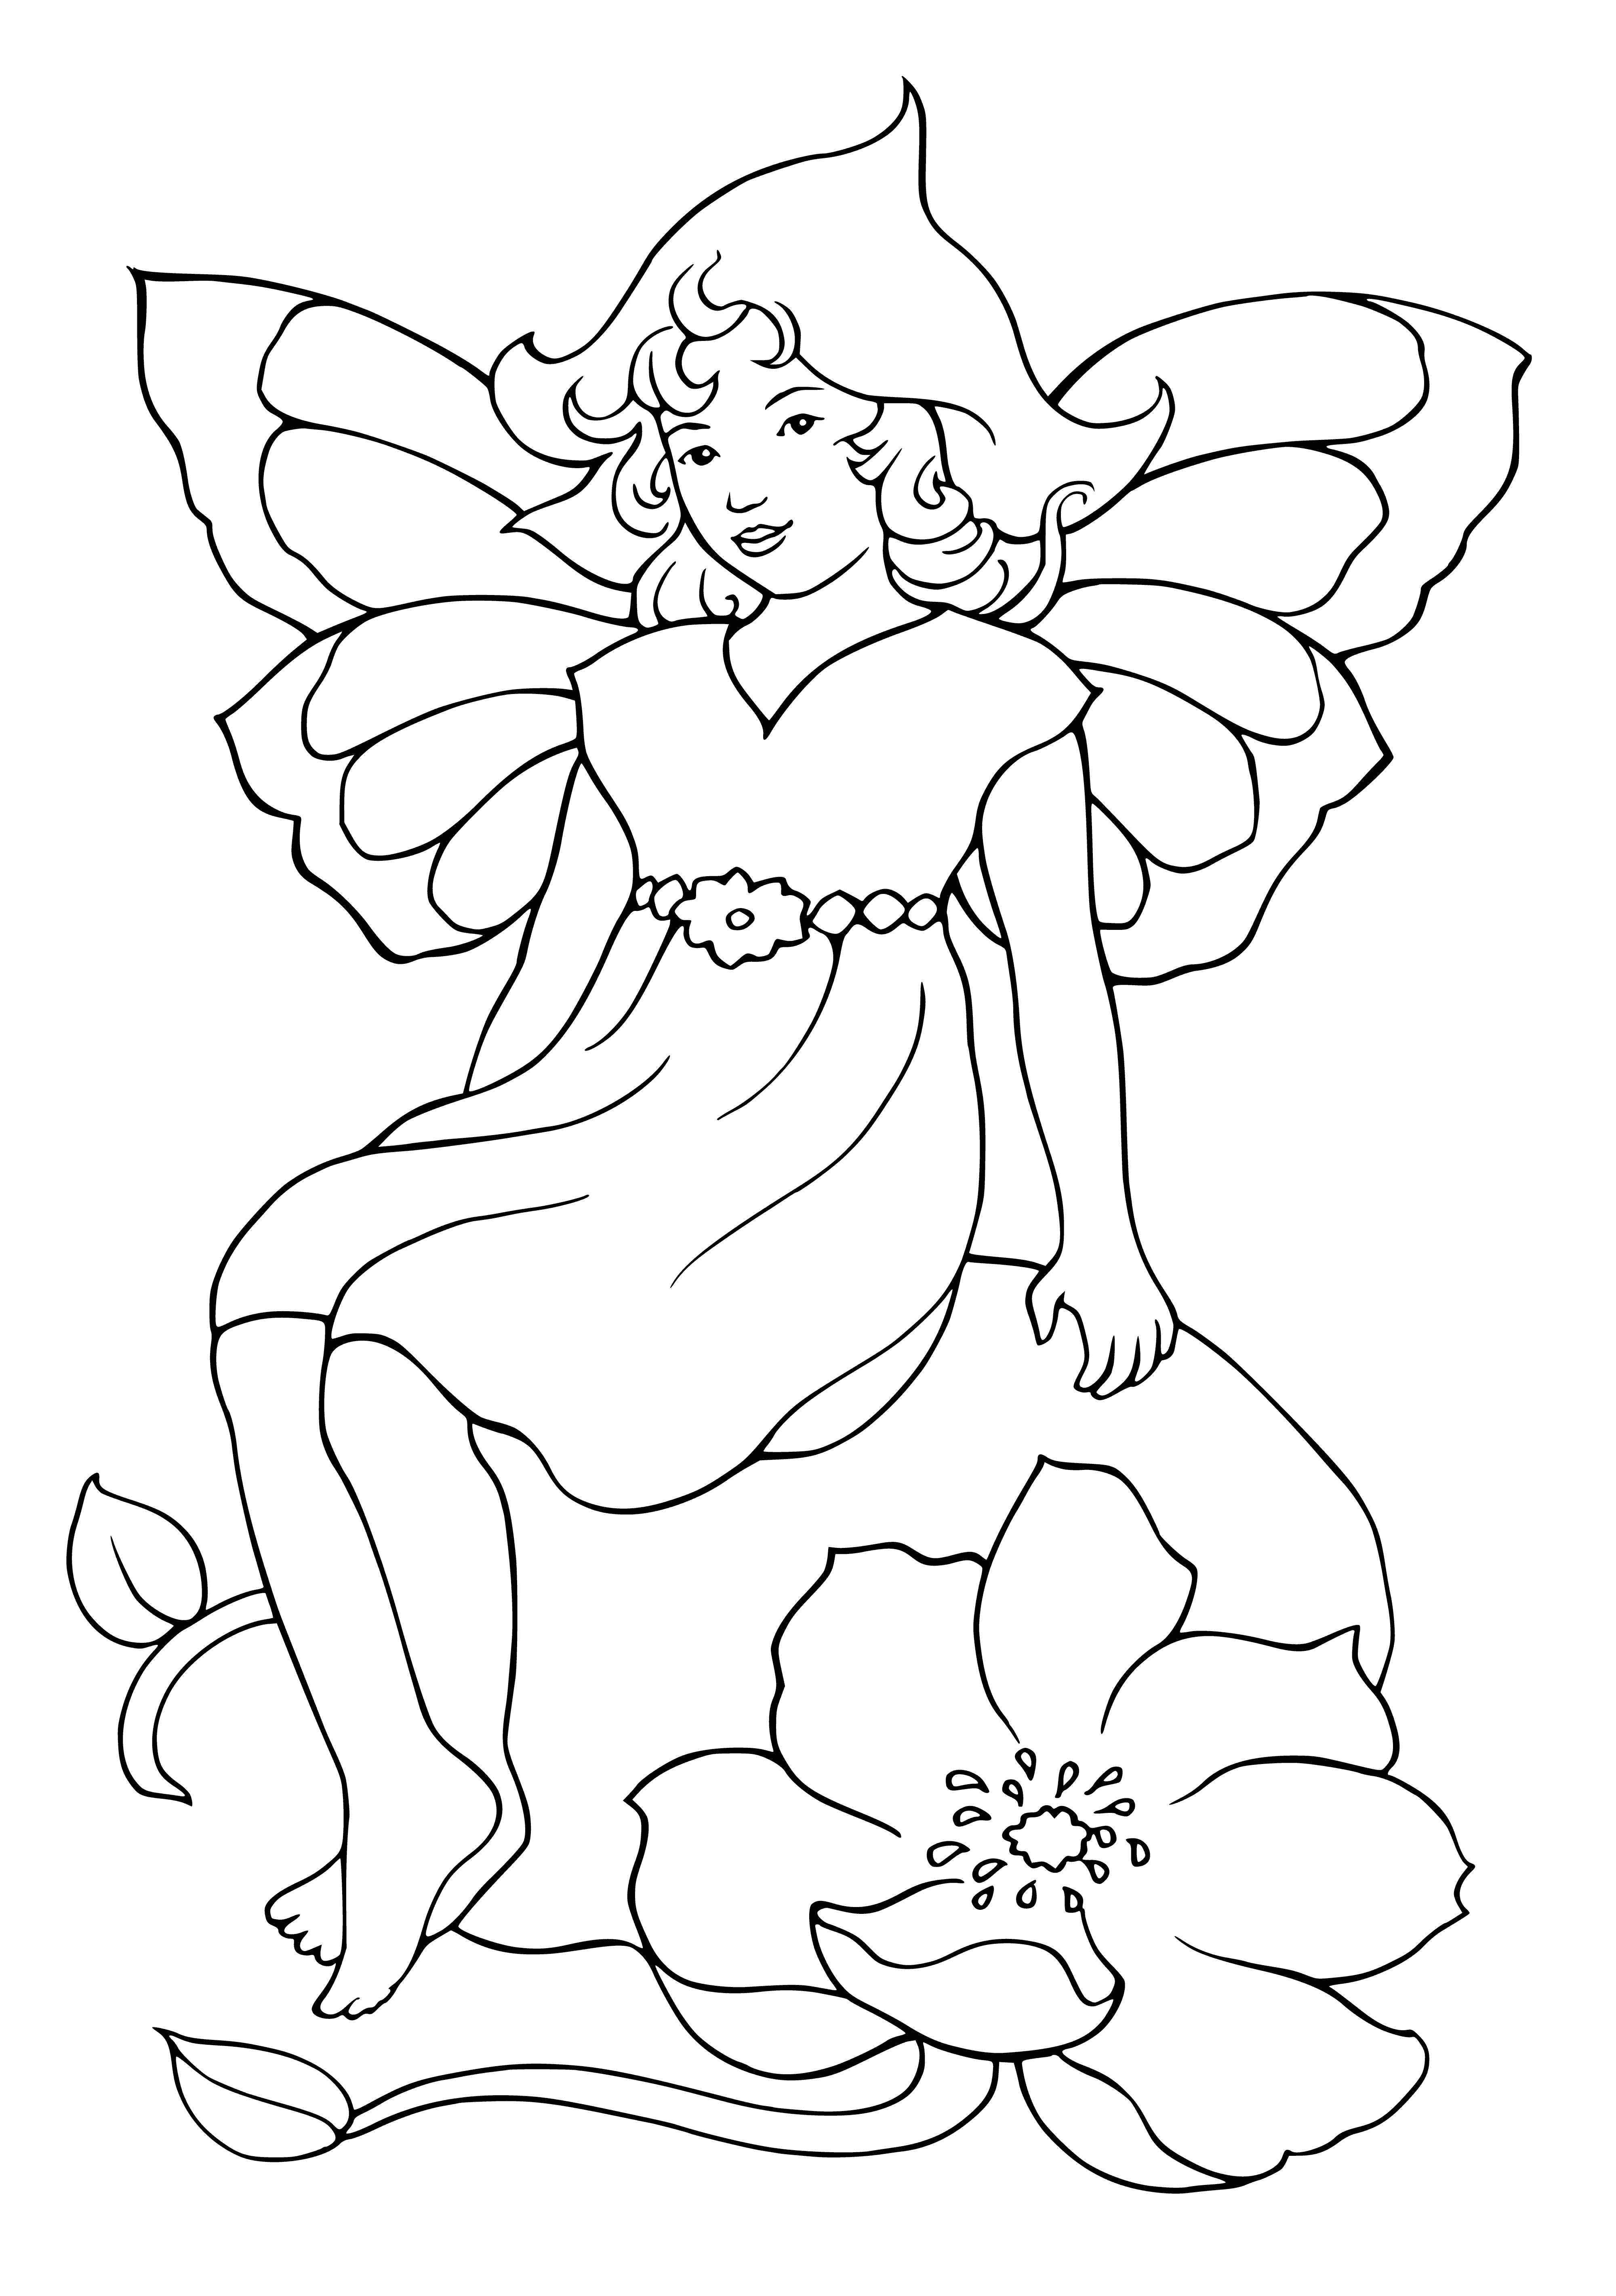 coloring page: Good creatures, pointy ears, leaf garments, fly/wings, magic wands, help with their magic.